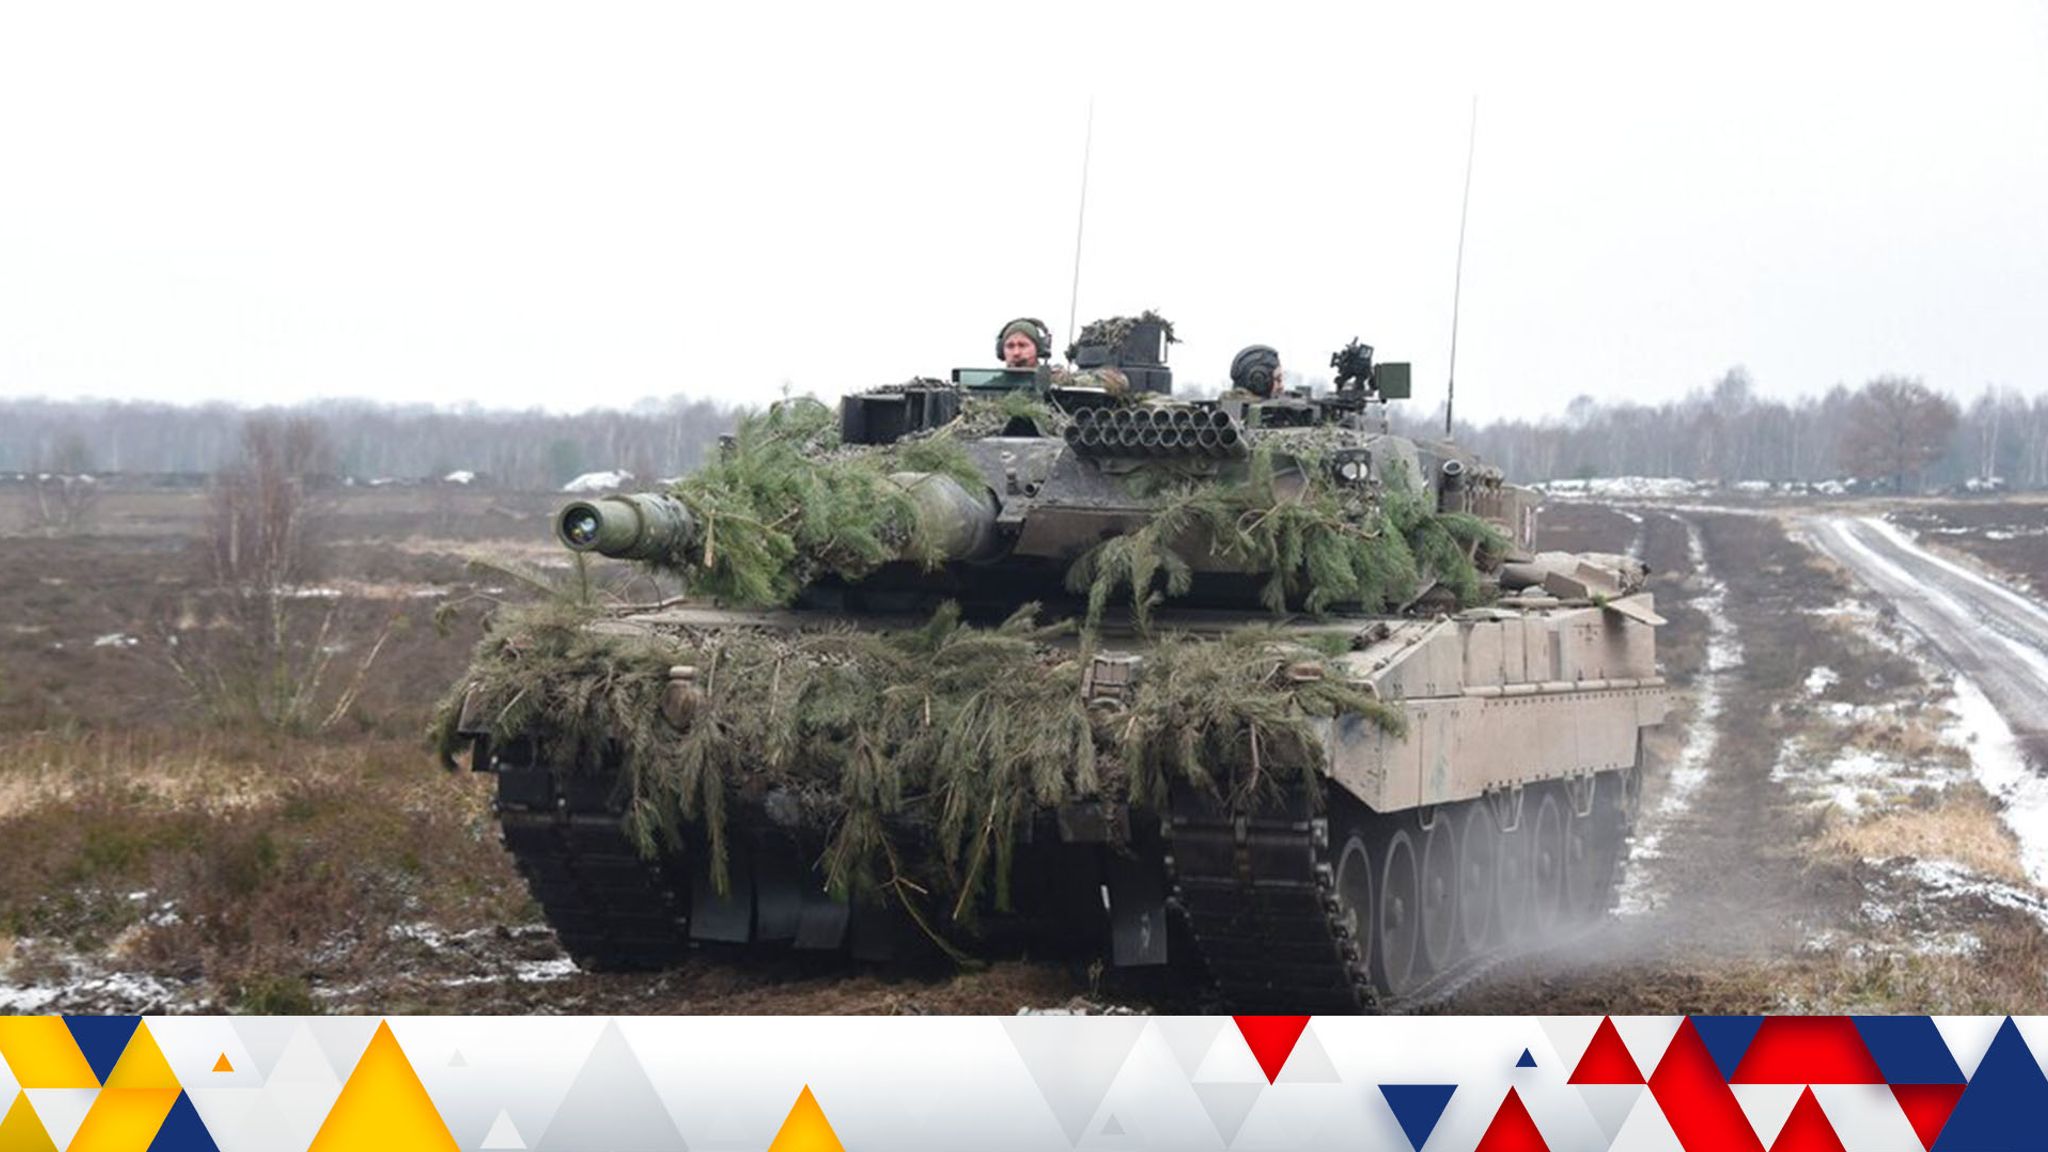 UK Challenger-2 tanks will be deployed by Ukraine in March